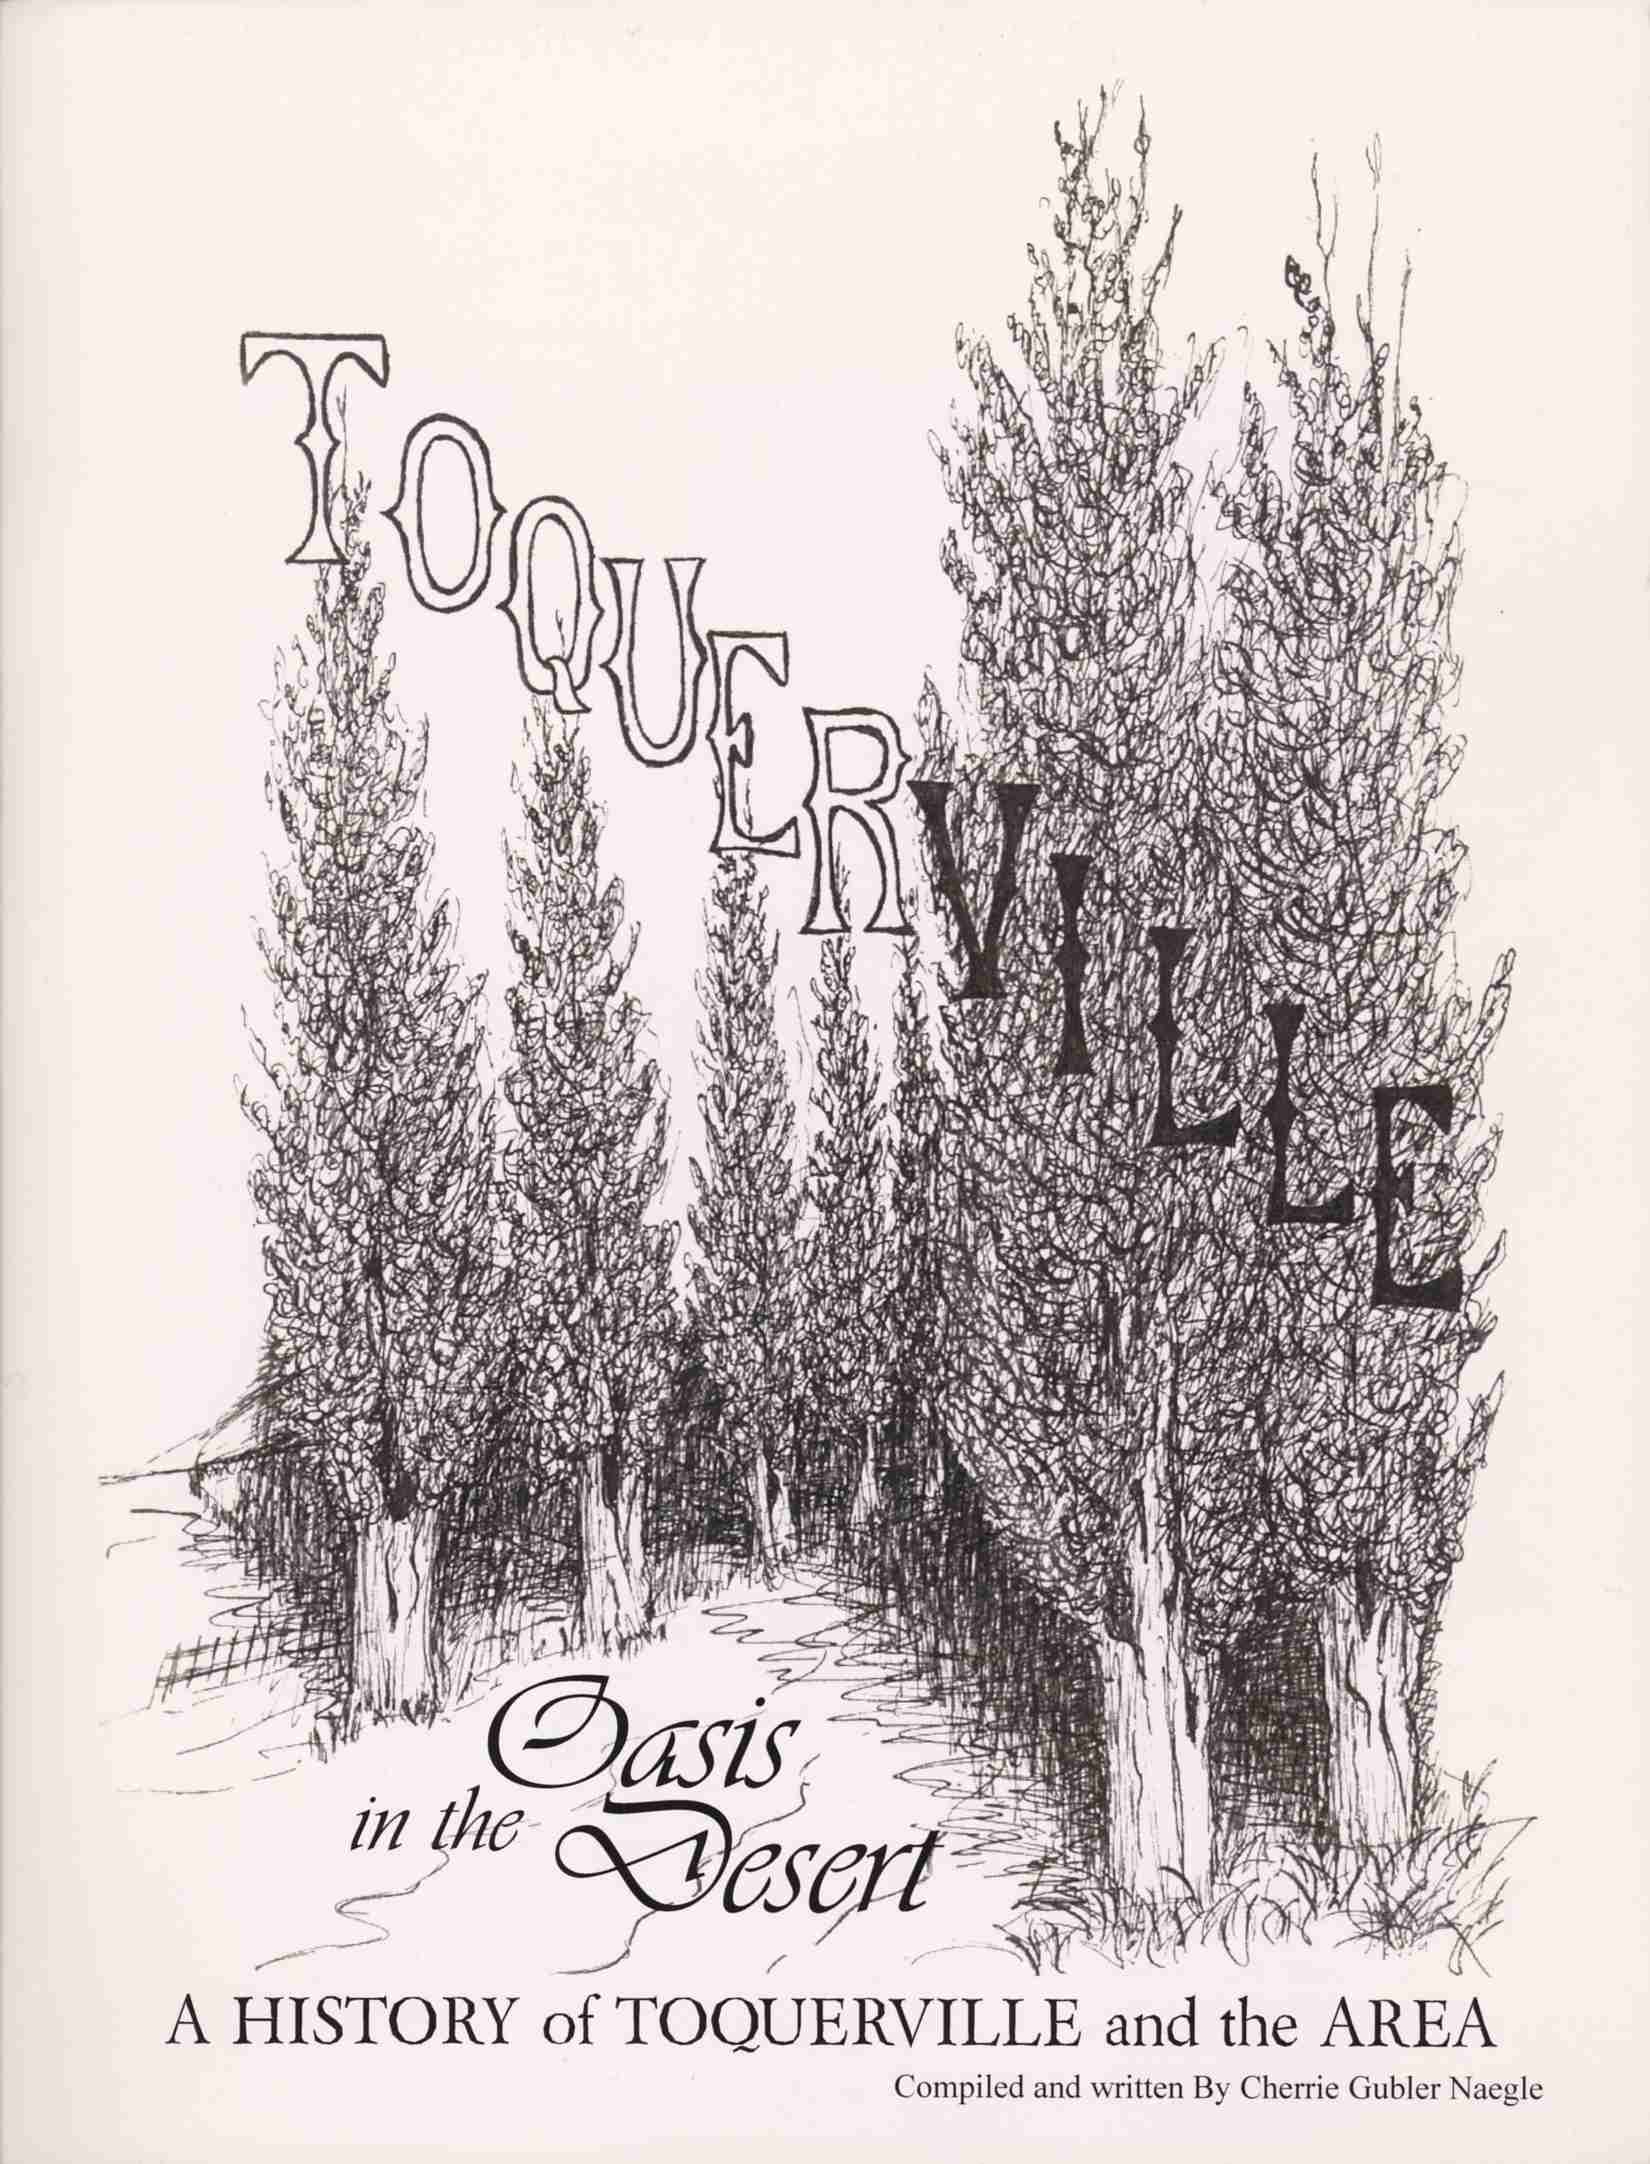 Book: Toquerville, Oasis in the Desert - A History of Toquerville and the Area